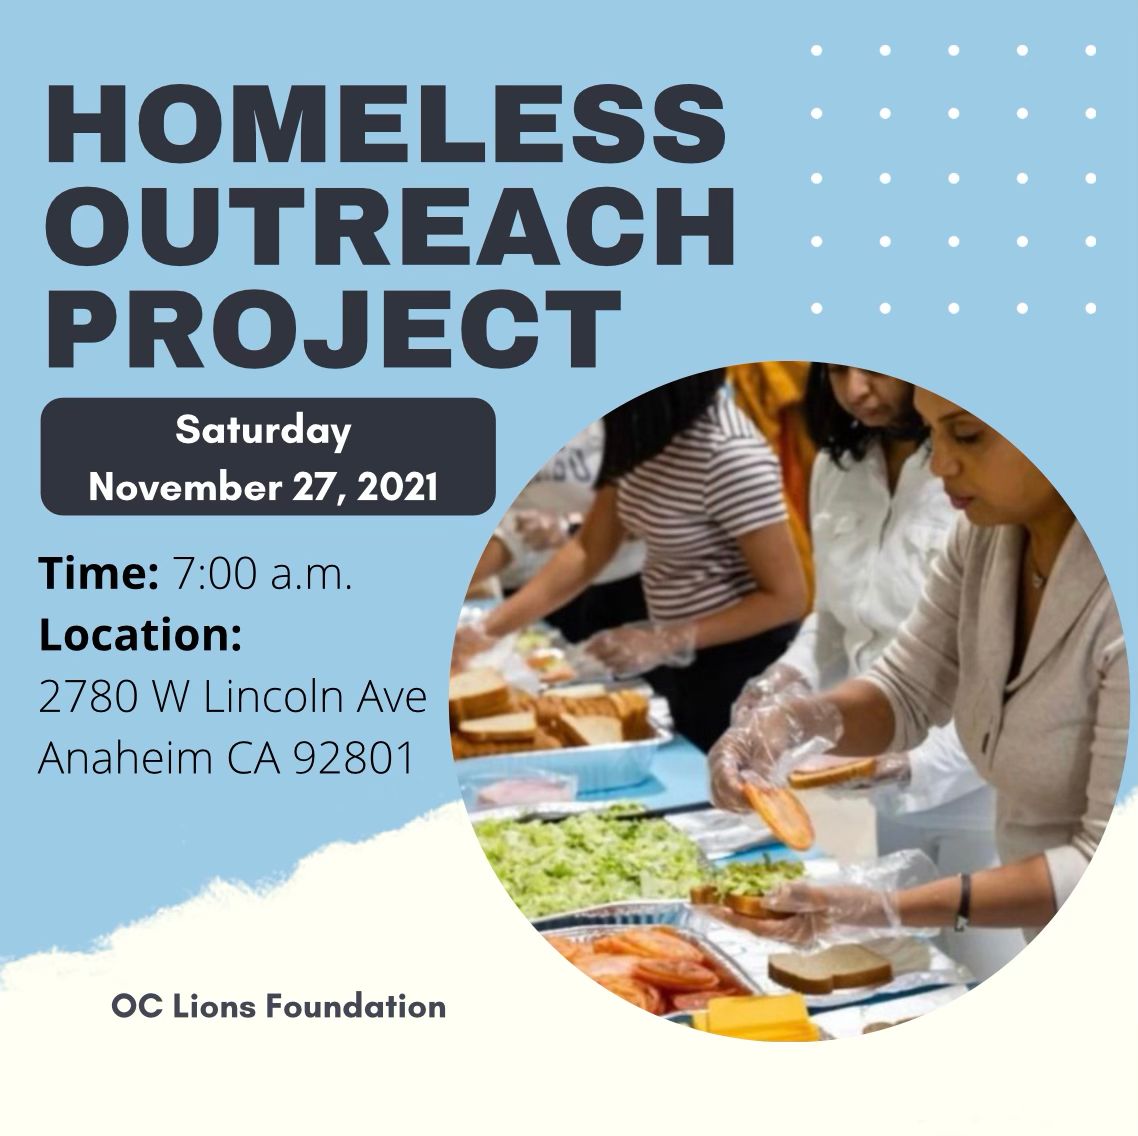 HOMELESS OUTREACH PROJECT